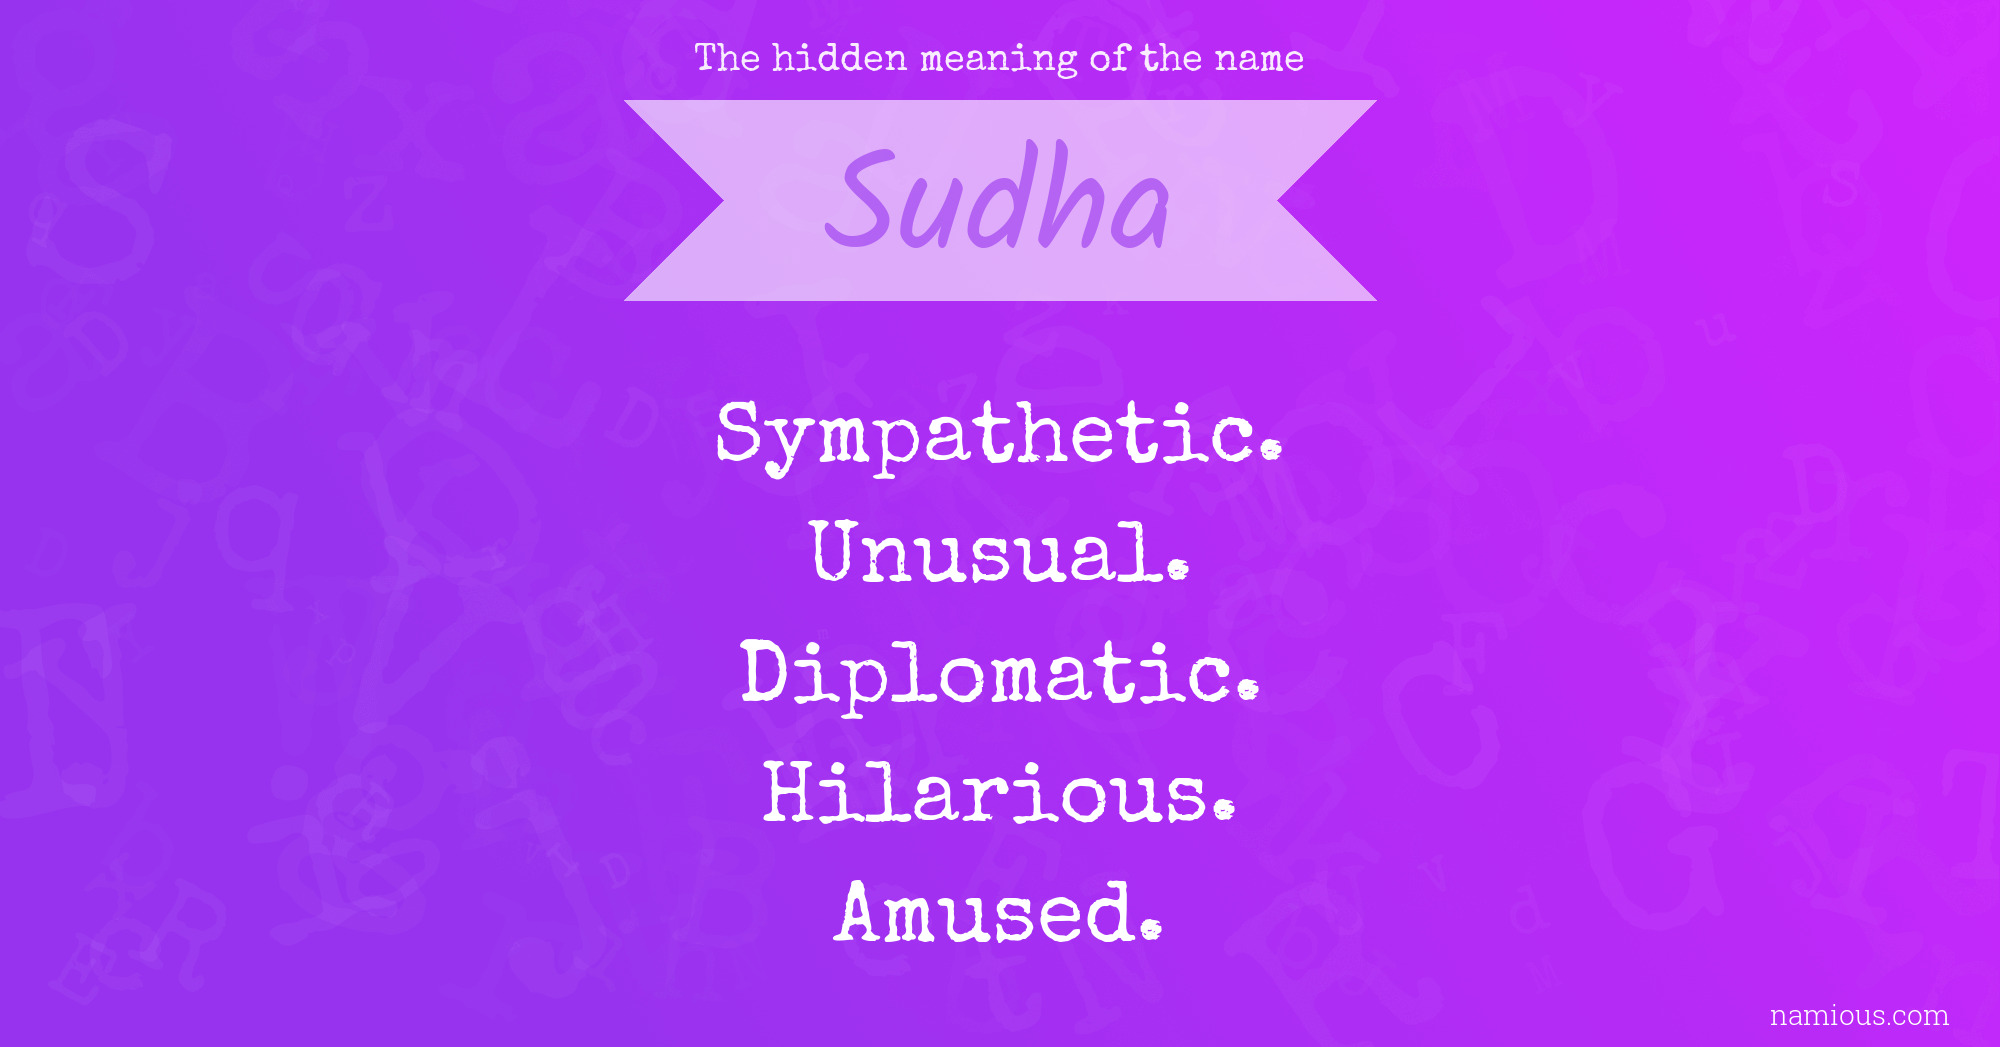 The hidden meaning of the name Sudha